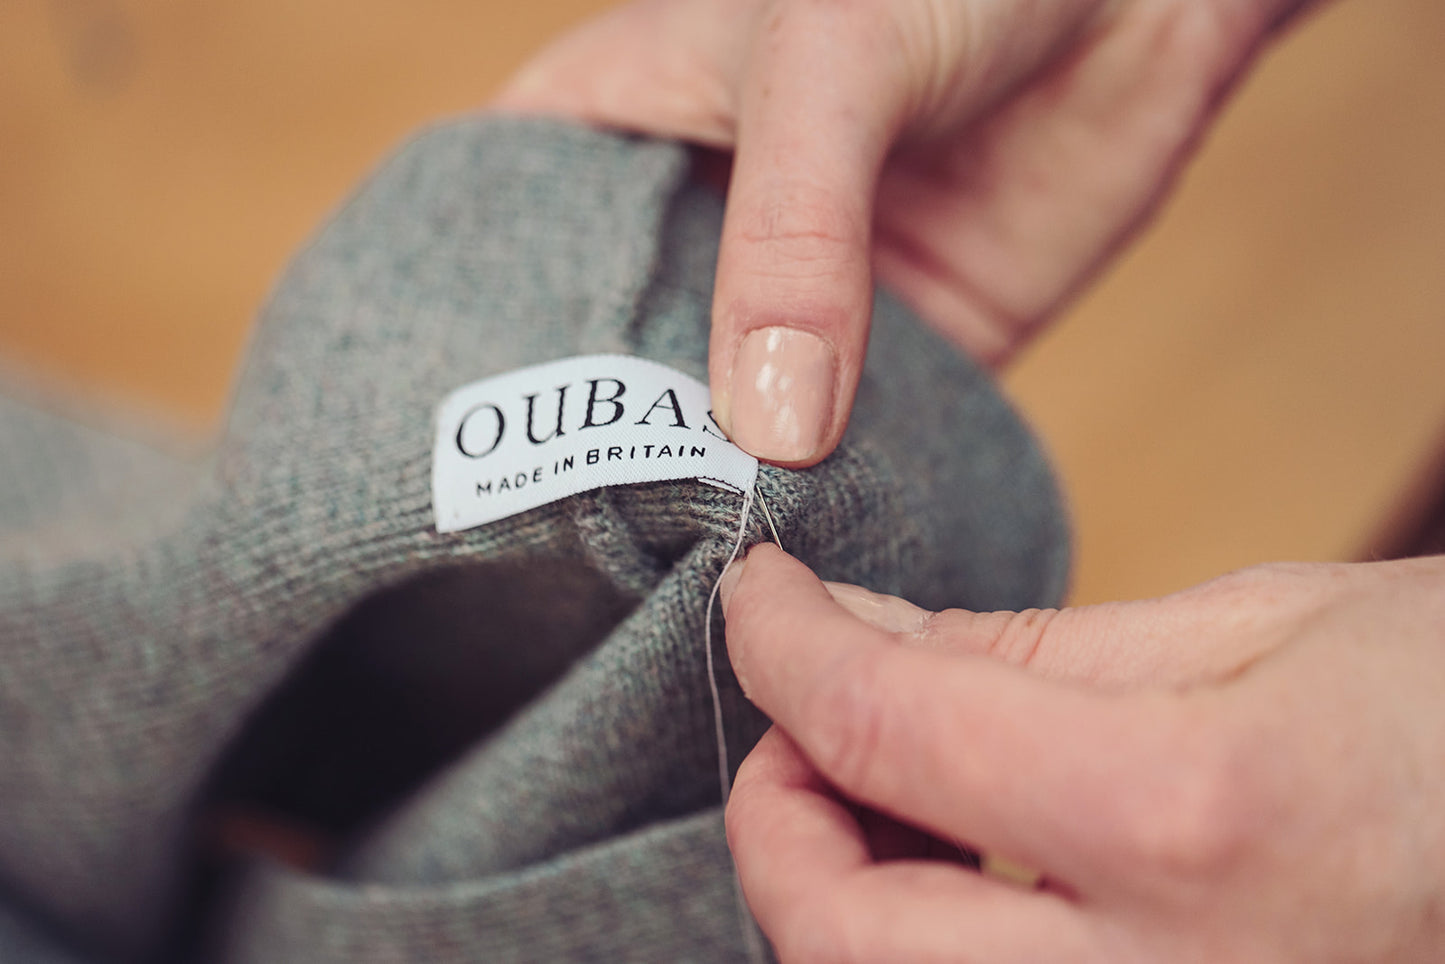 OUBAS Knitwear Immersion Day